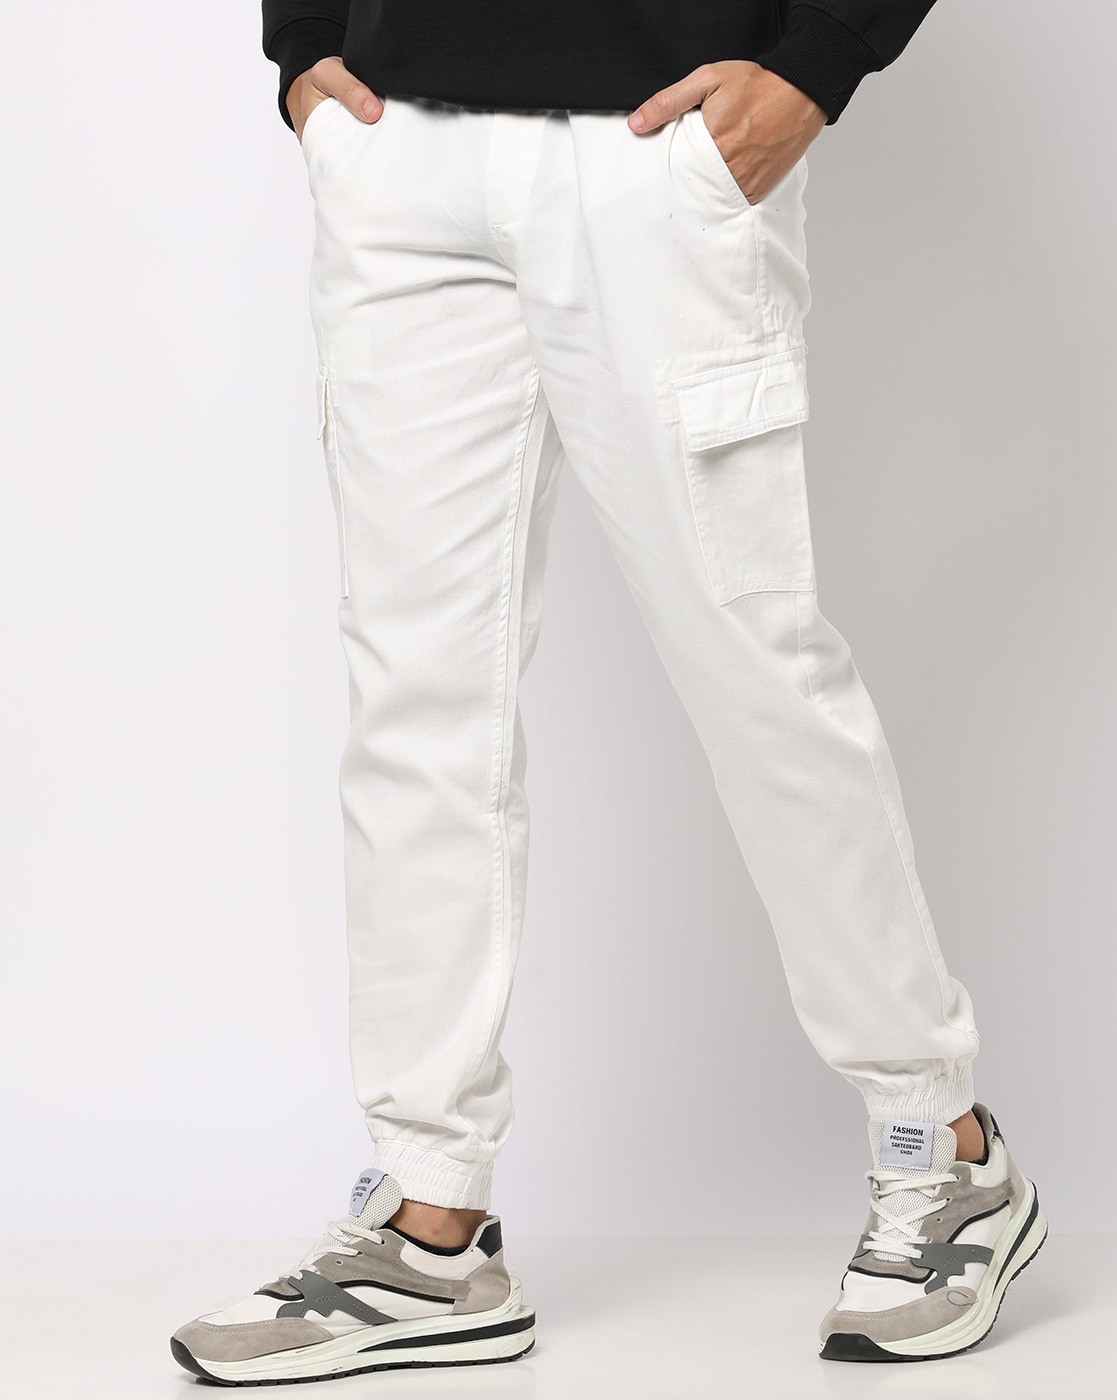 Wide cargo trousers - White - Ladies | H&M IN